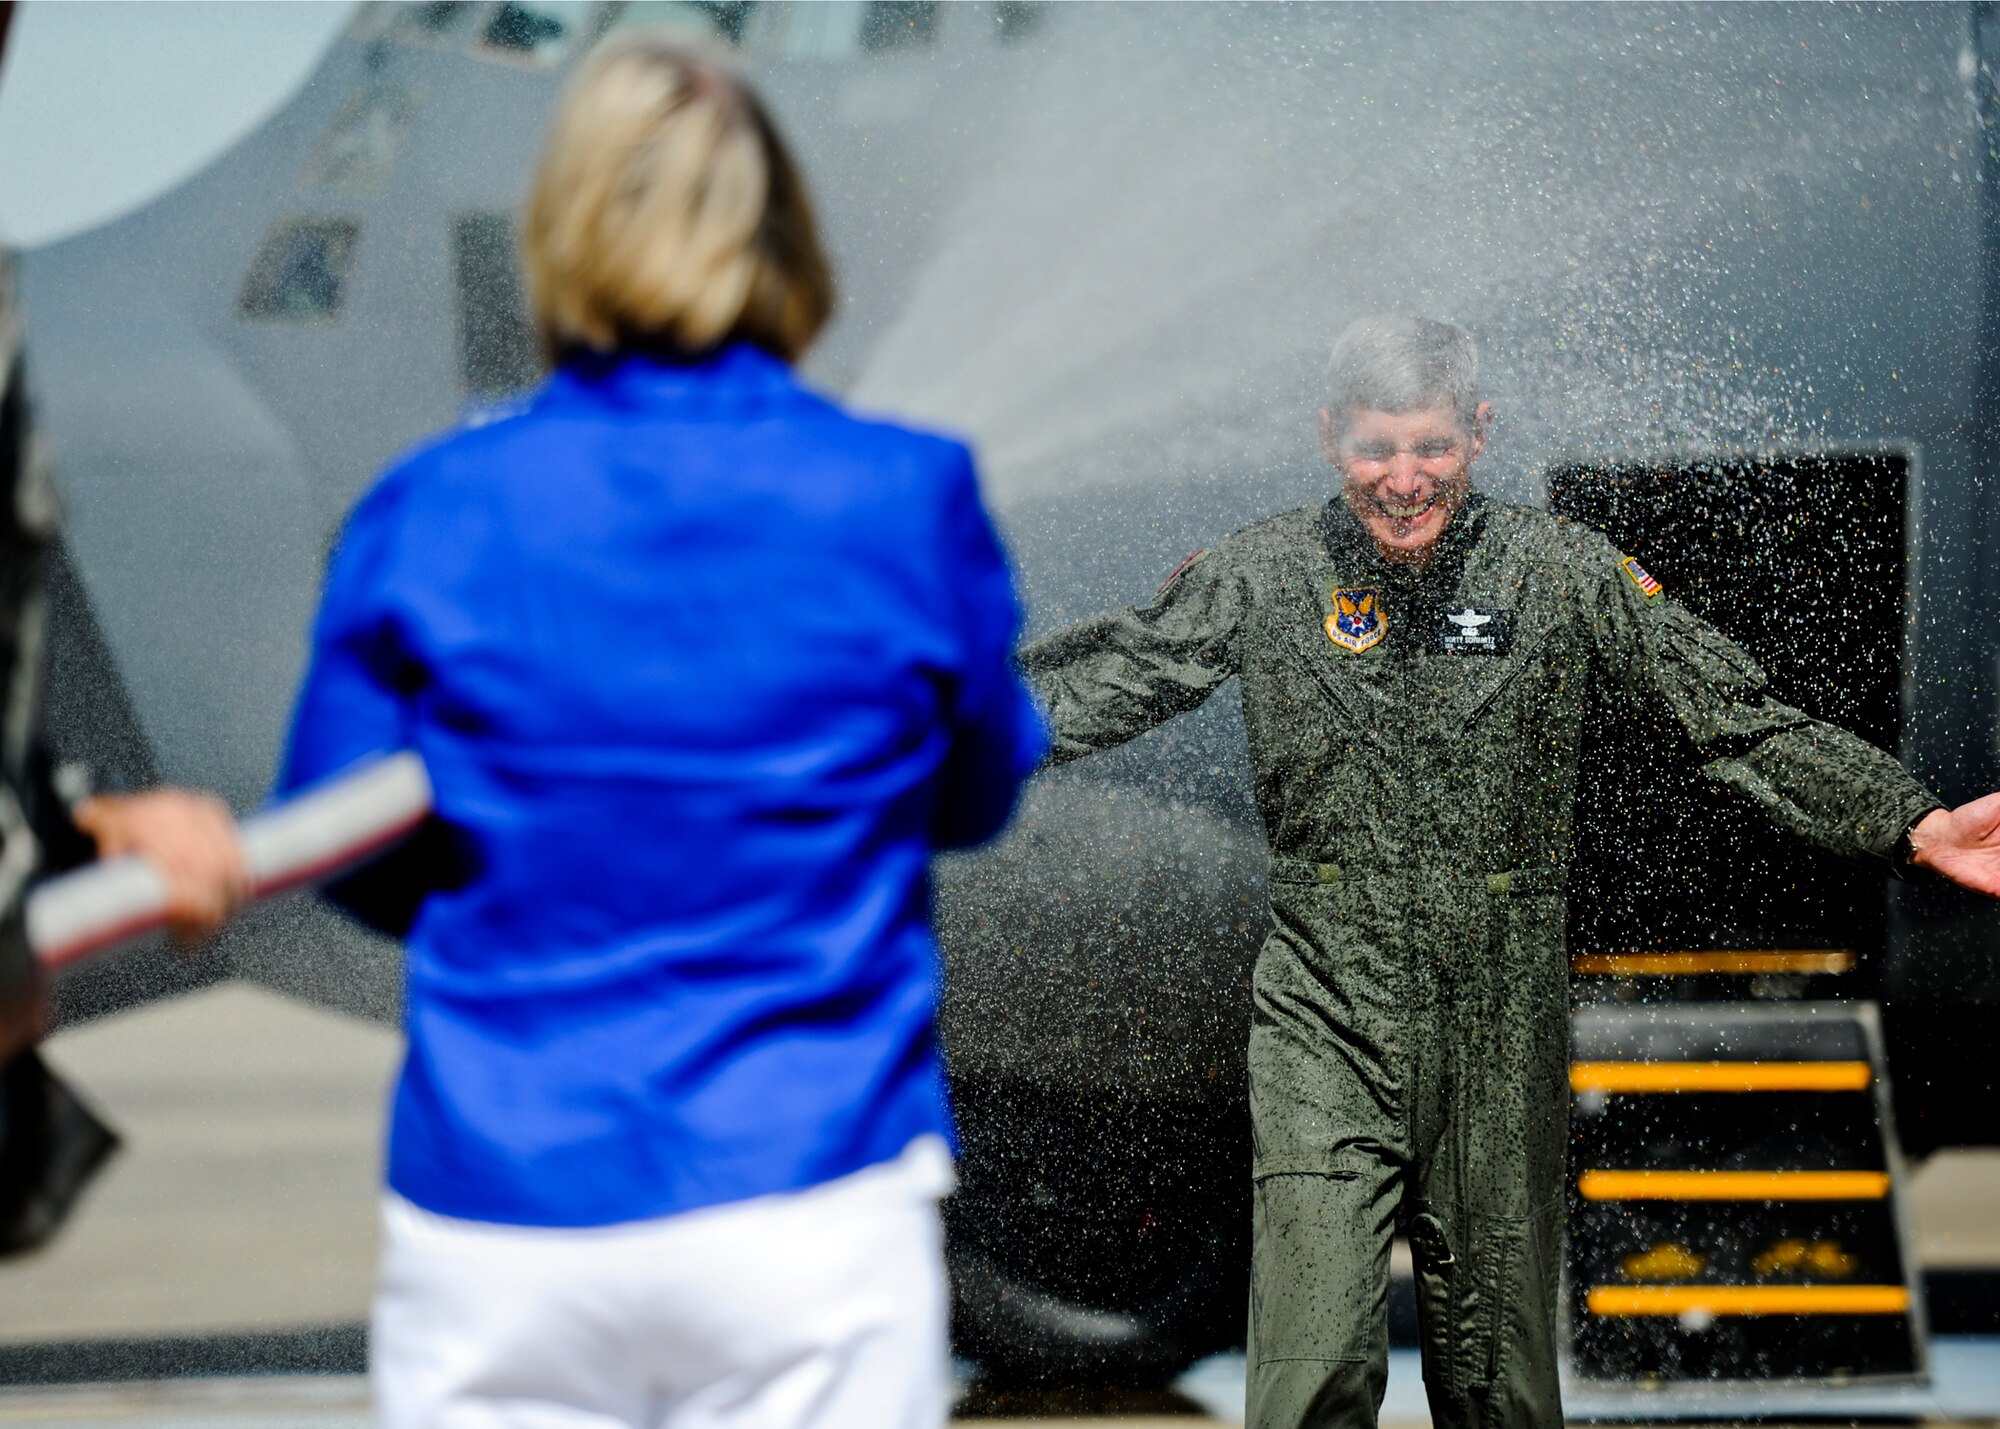 Air Force Chief of Staff Gen. Norton Schwartz gets “hosed down” by his wife Suzie  following his last flight as an active duty officer  at Hurlburt Field, Fla., July 12, 2012. The MC-130E Combat Talon I crew conducted a local training sortie during the mission. It also served as Schwartz’s “fini flight” in the Air Force. (U.S. Air Force photo/Staff Sgt. David Salanitri)
